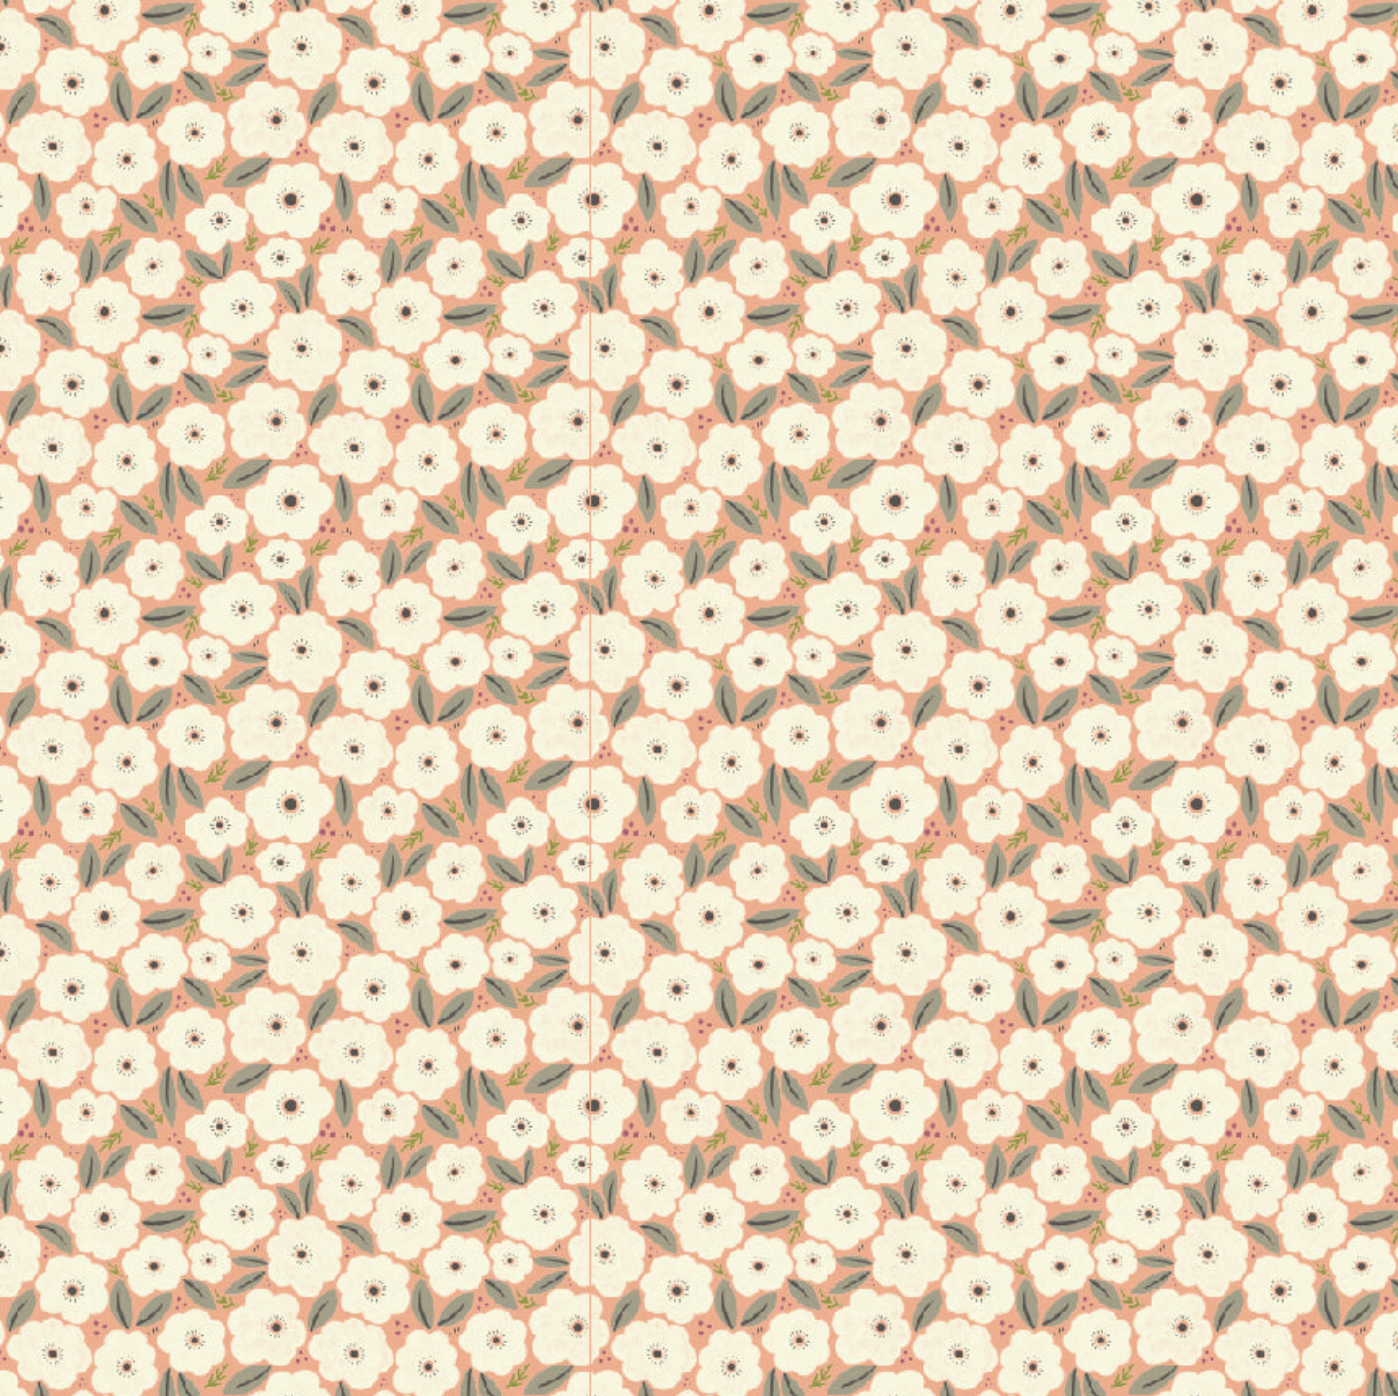 Cottage Charm, Always Anemone Peach, CH24752, sold by the 1/2 yard, *PREORDER